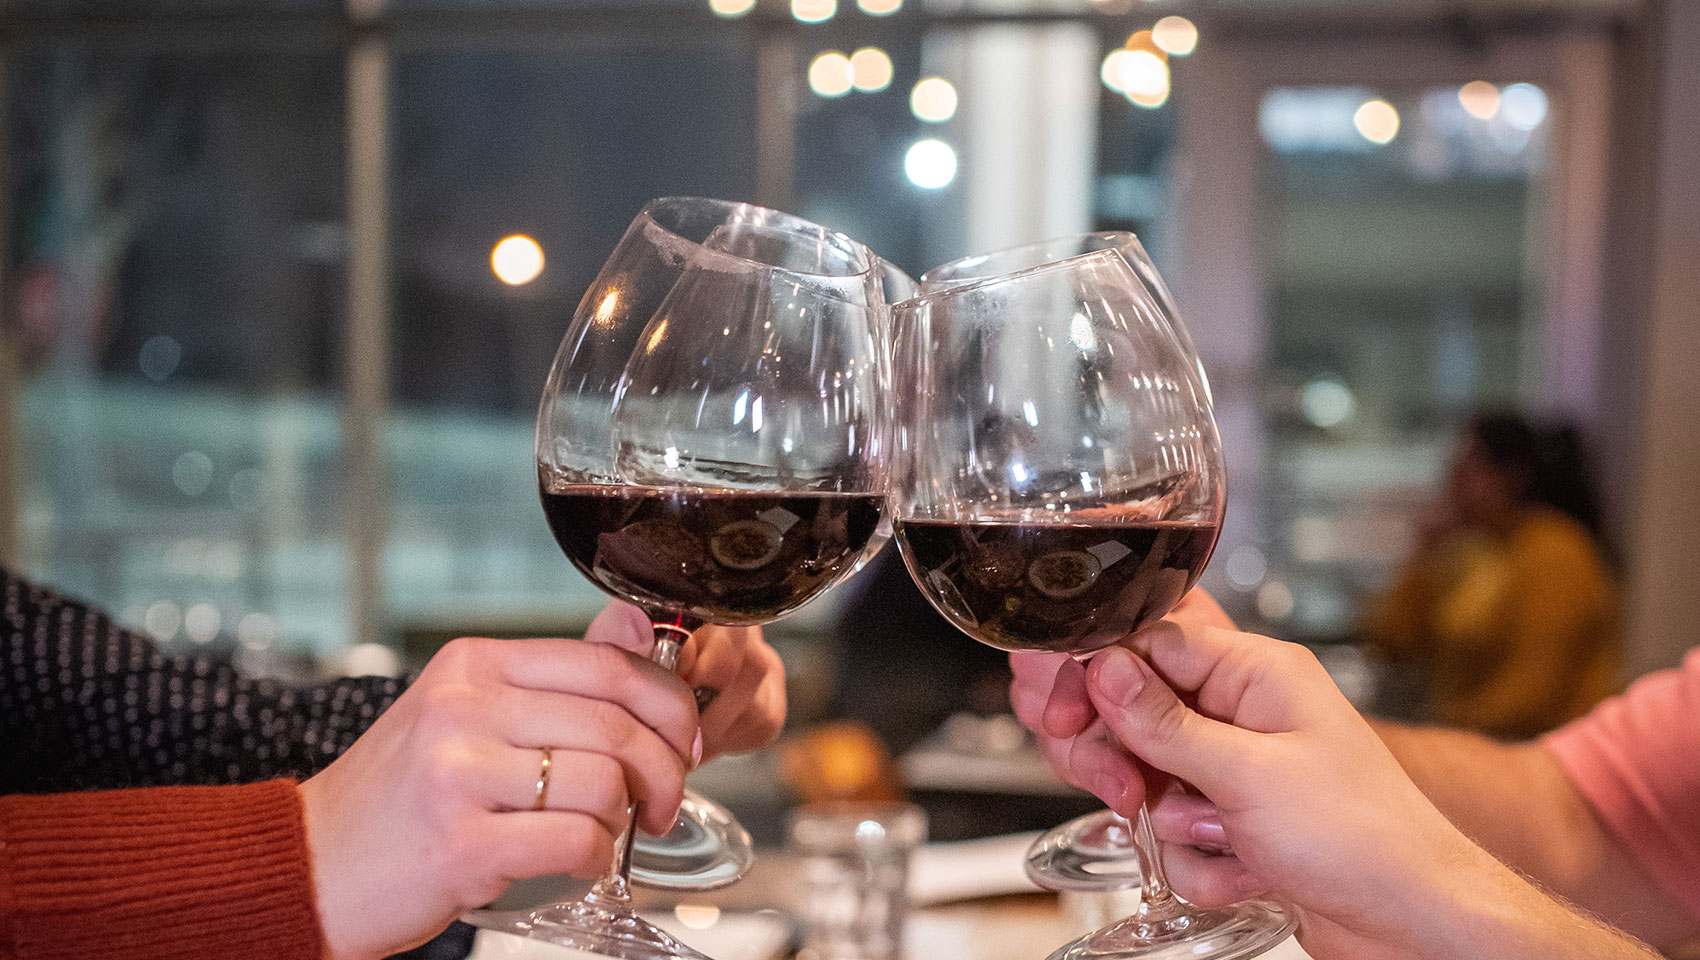 hands toasting with glasses of wine